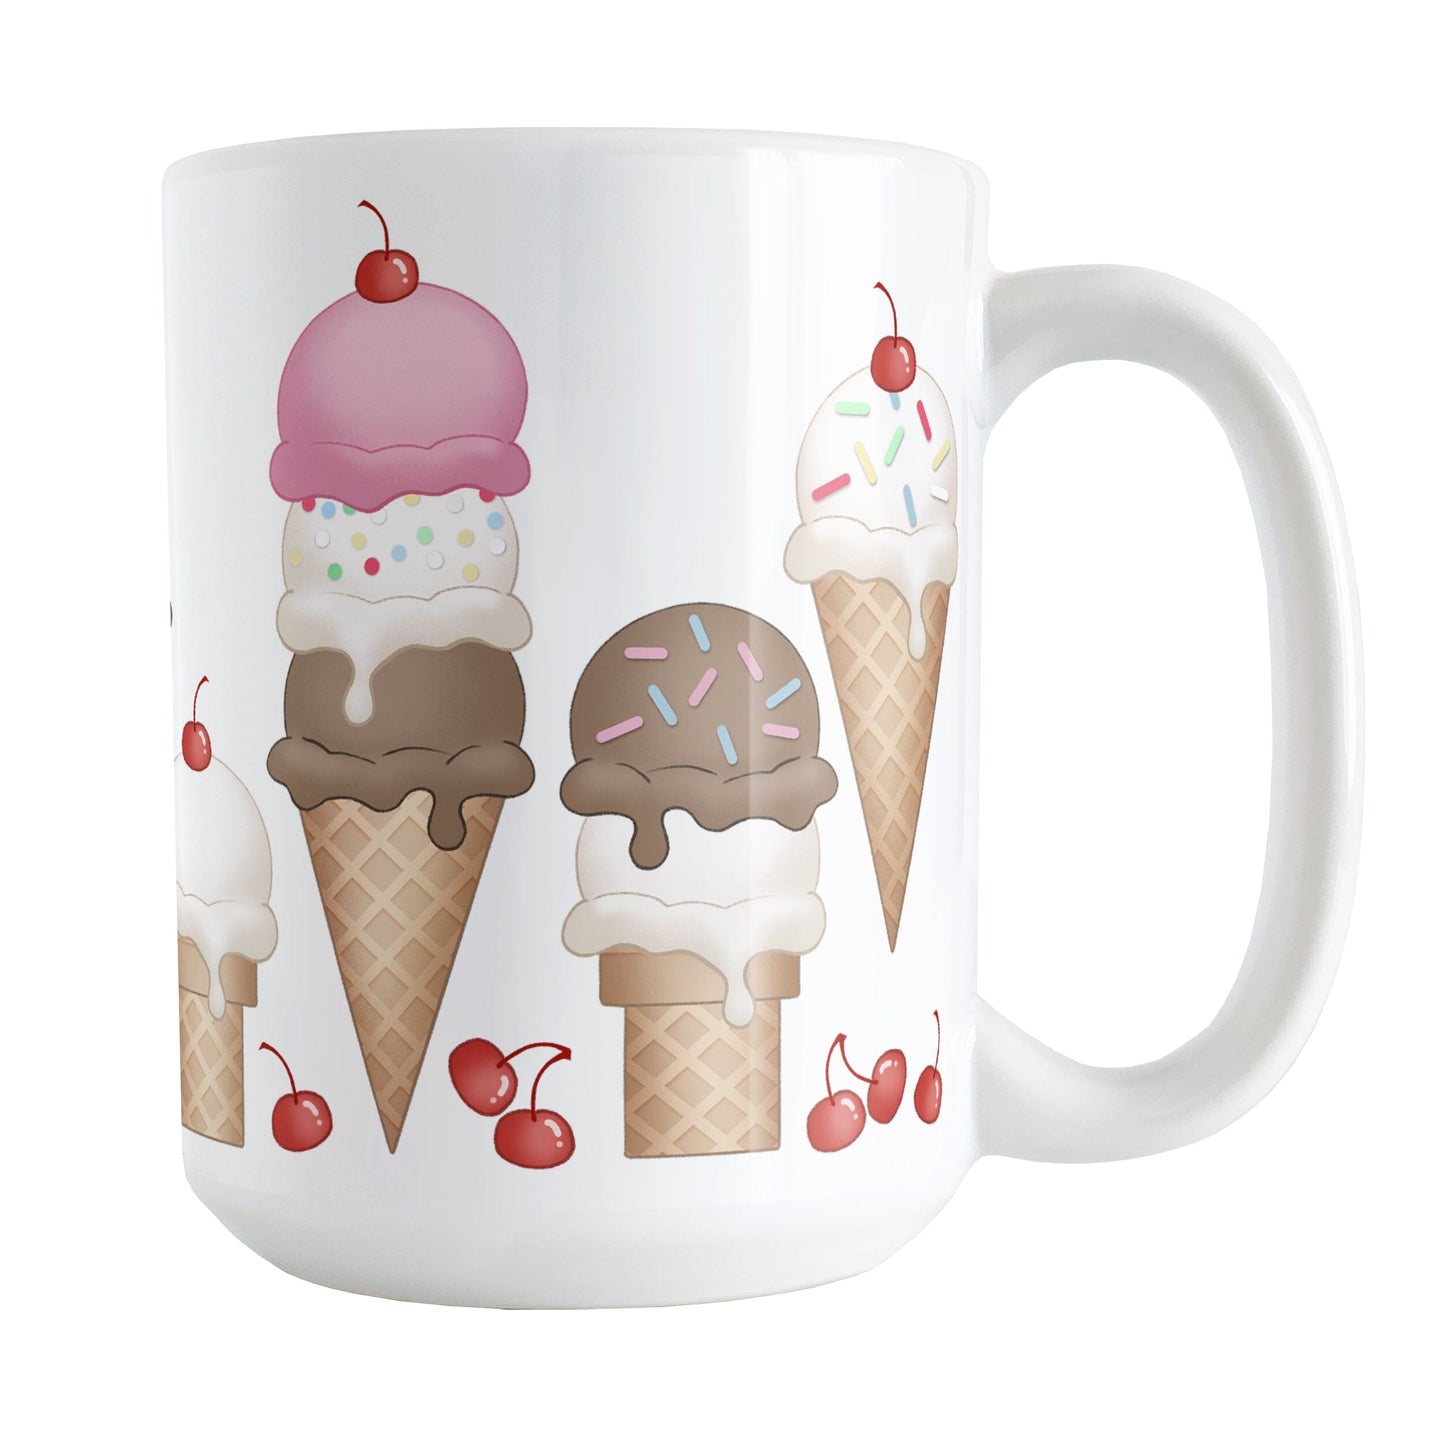 Ice Cream Cones and Cherries Mug (15oz) at Amy's Coffee Mugs. A ceramic coffee mug designed with hand-drawn ice cream cones with chocolate, vanilla, and strawberry scoops, sprinkles, and cherries. 